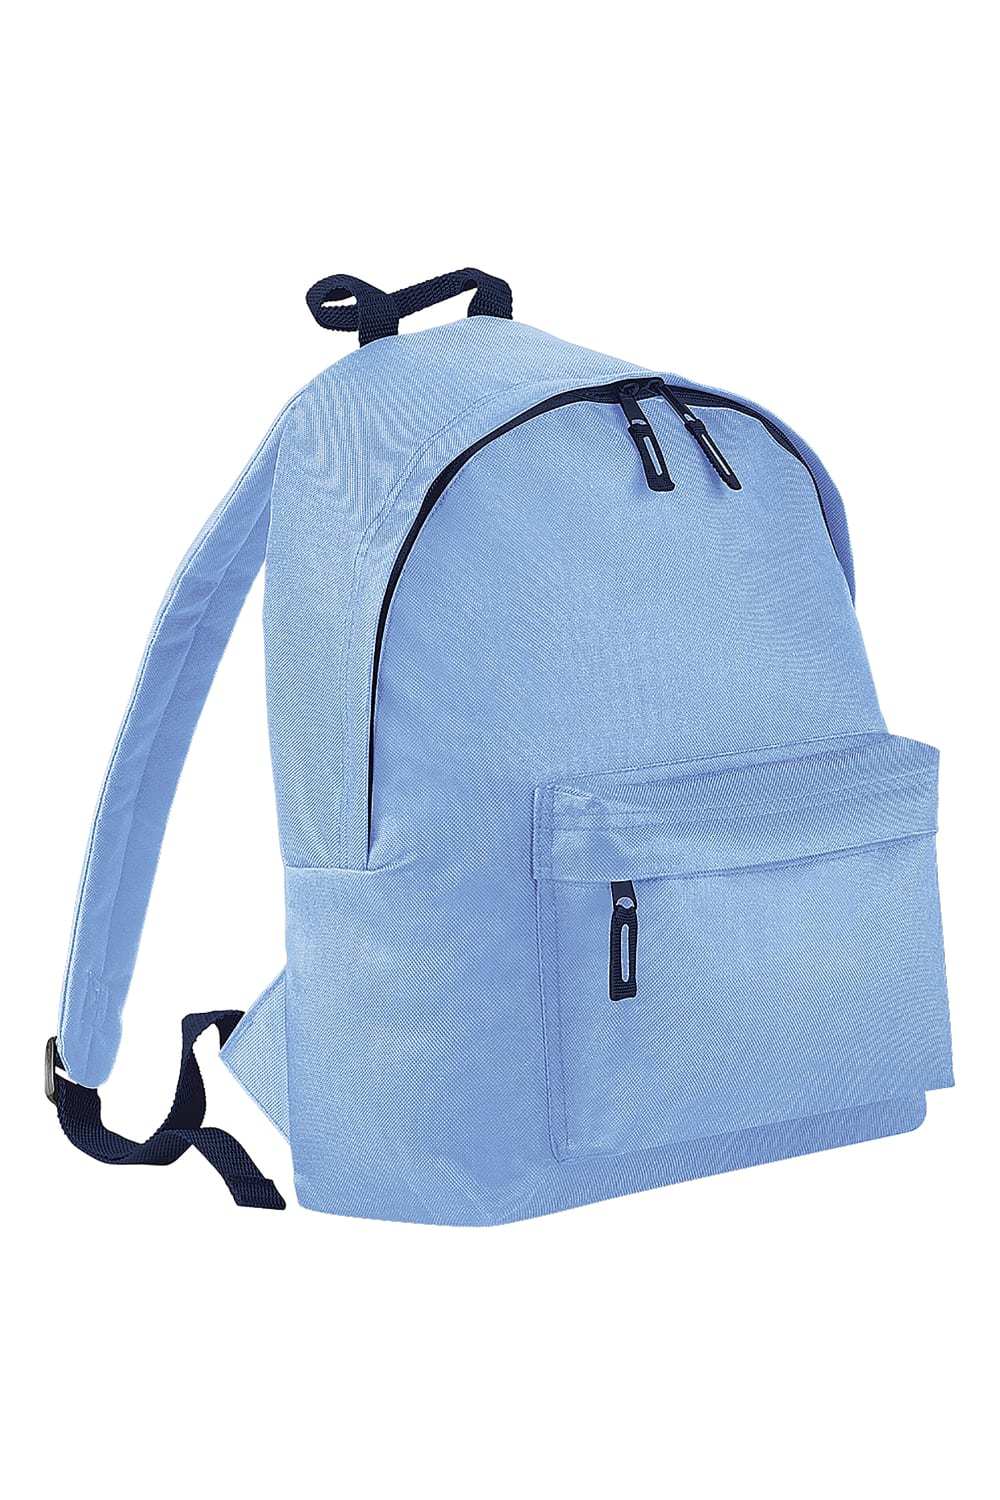 Fashion Backpack / Rucksack (18 Liters) (Sky Blue/French Navy)